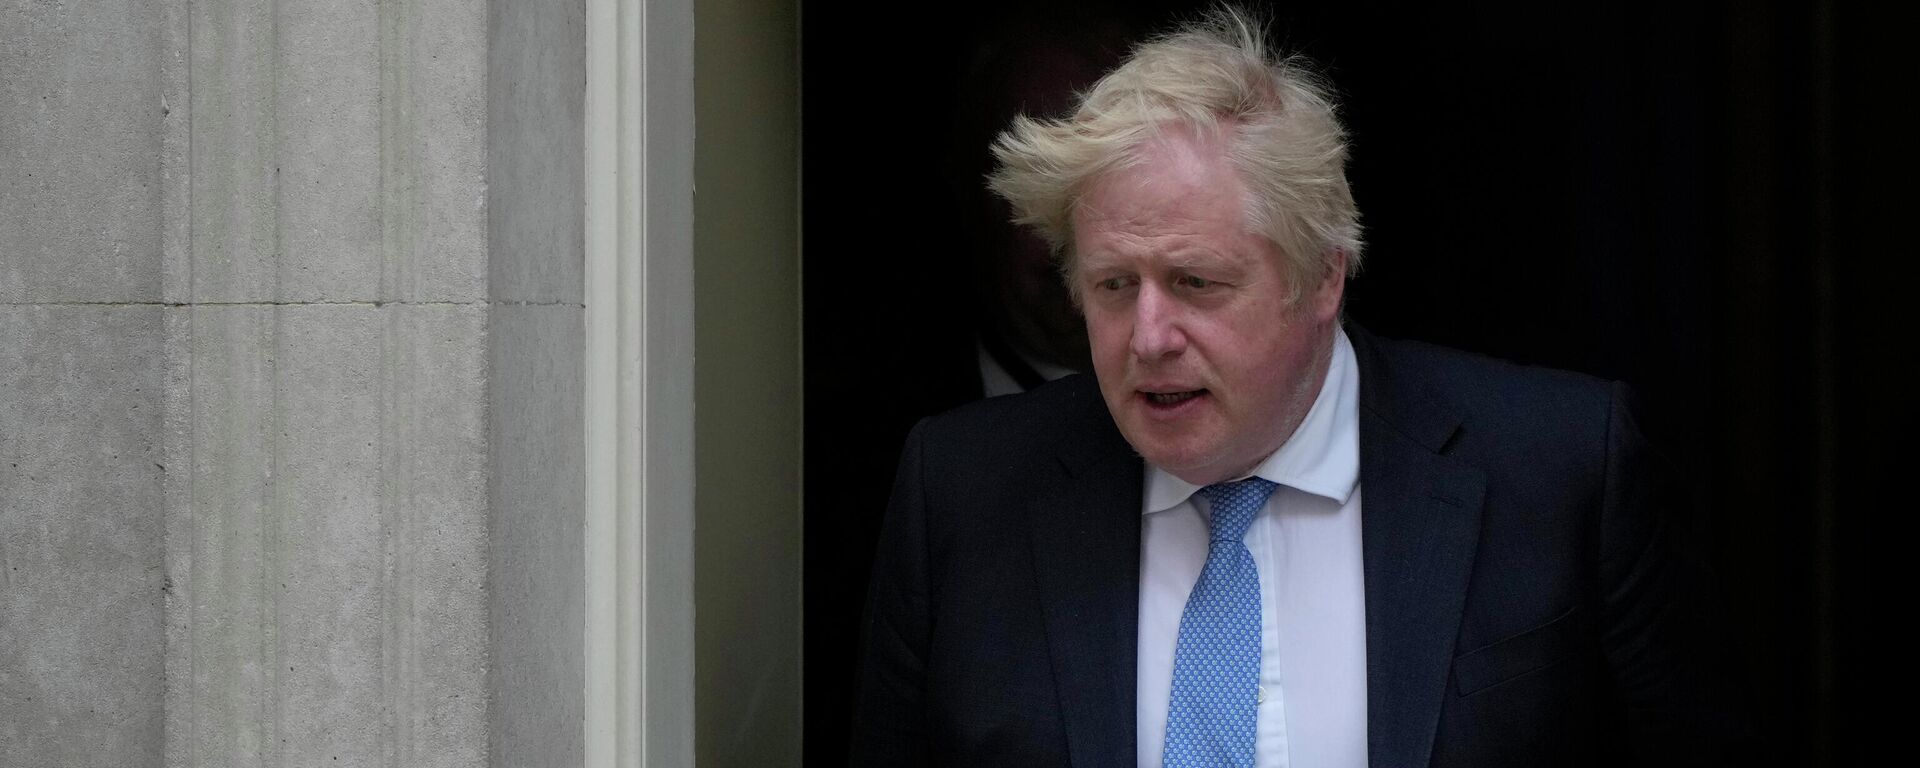 Britain's Prime Minister Boris Johnson leaves 10 Downing Street for the House of Commons to make a statement about Downing Street parties during the coronavirus lockdowns in London, Tuesday, April 19, 2022 - Sputnik International, 1920, 24.04.2022